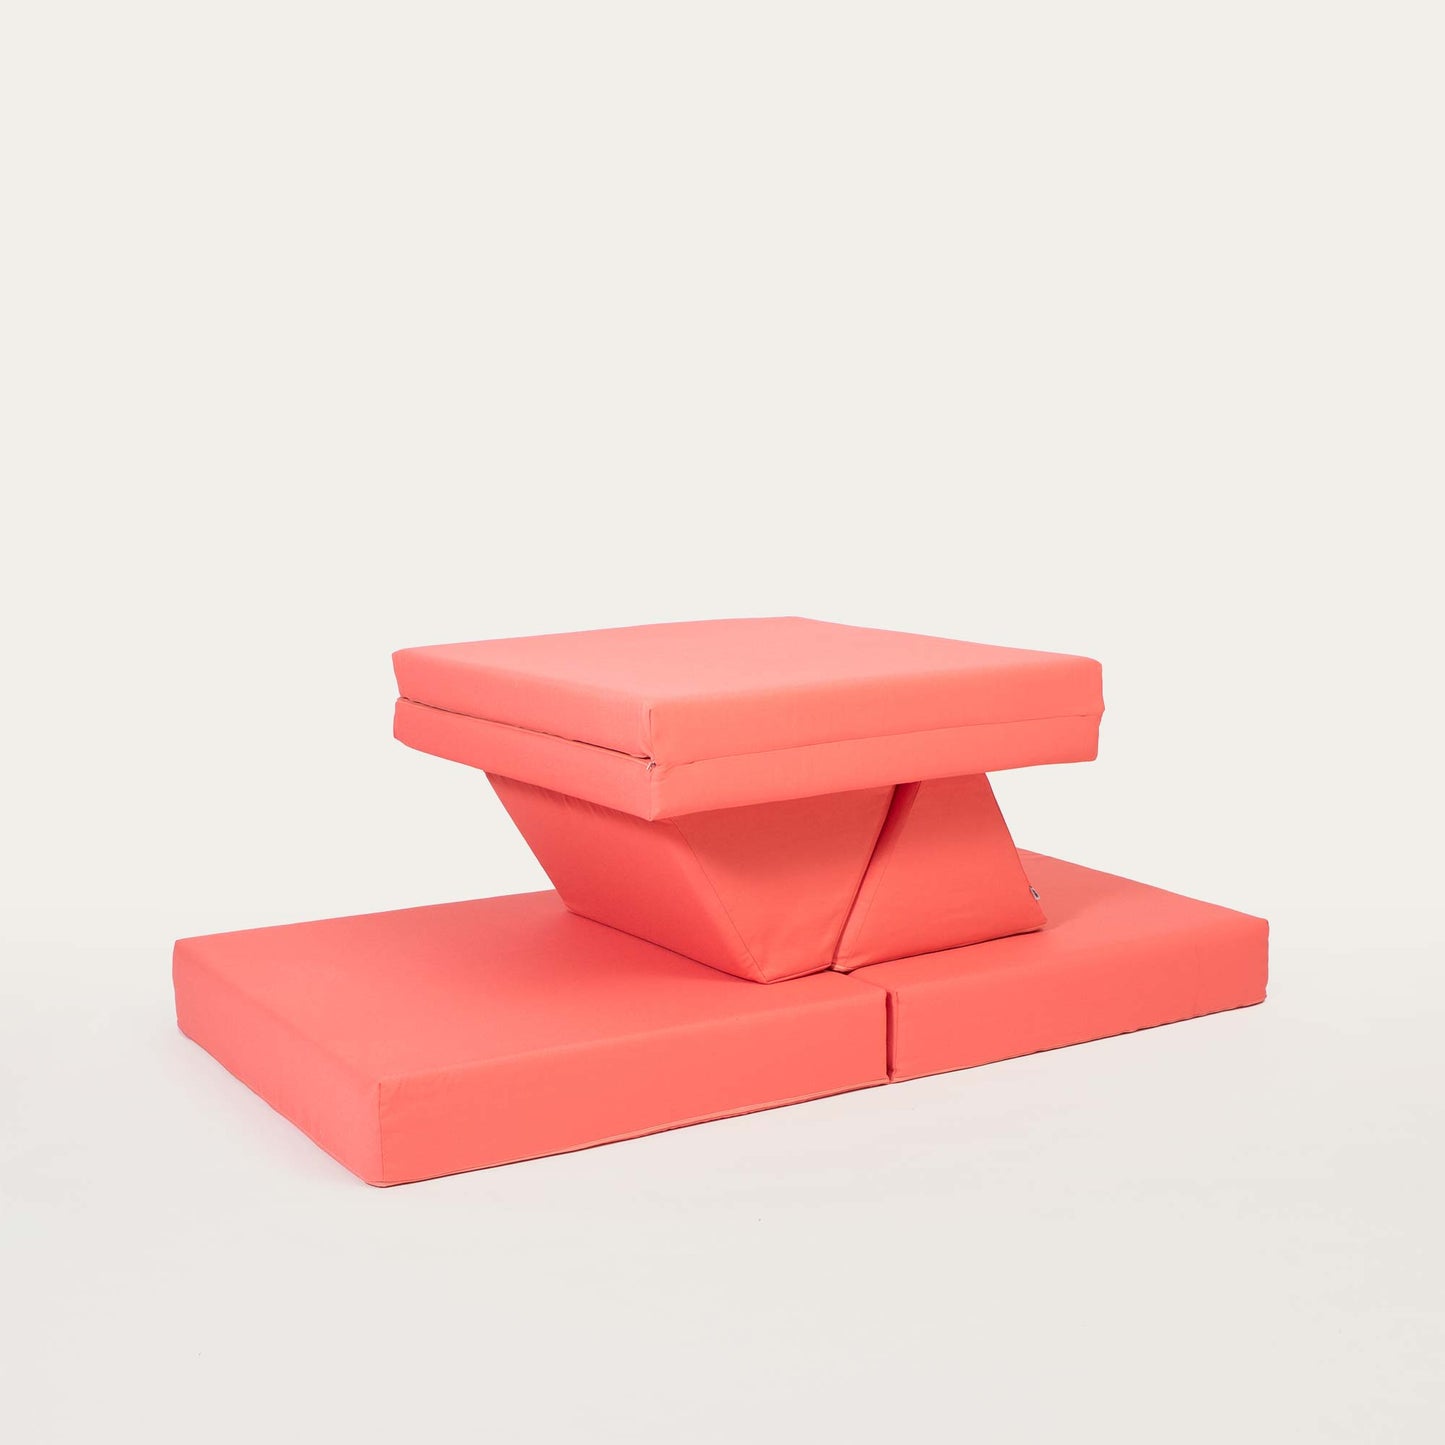 Coral Monboxy activity sofa arranged into a table and chair shape